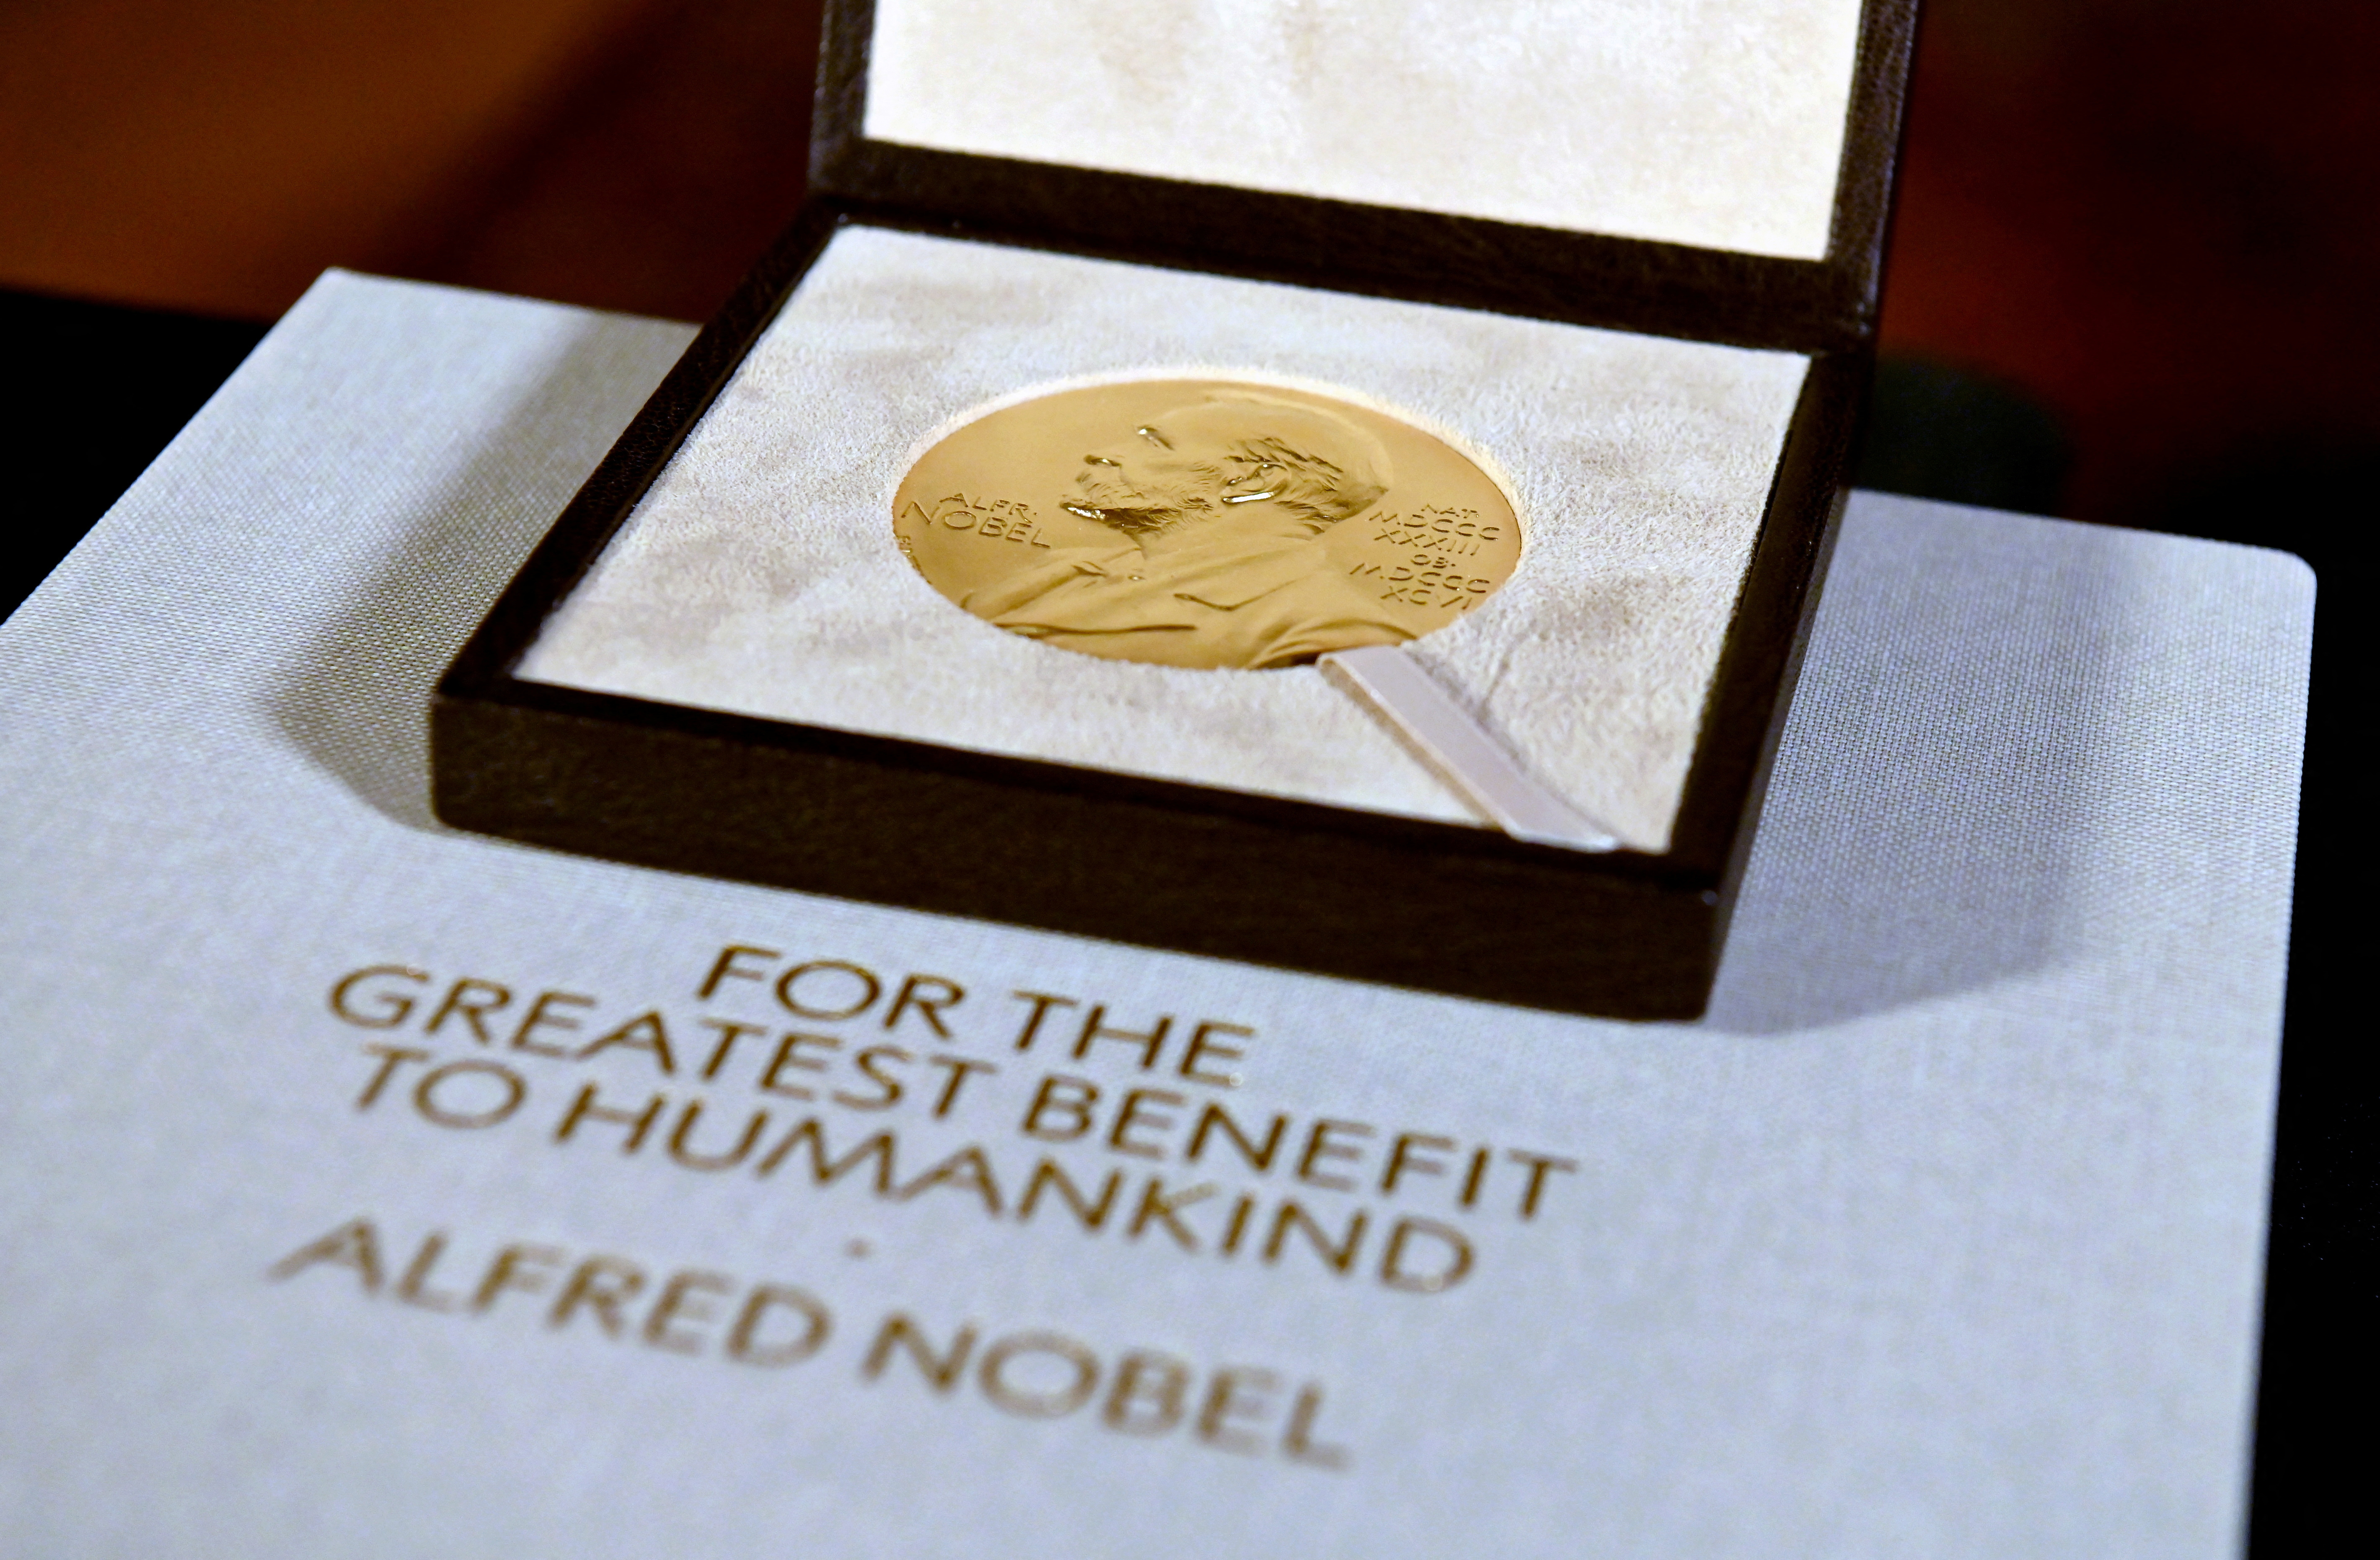 The medal - Nobel Peace Prize